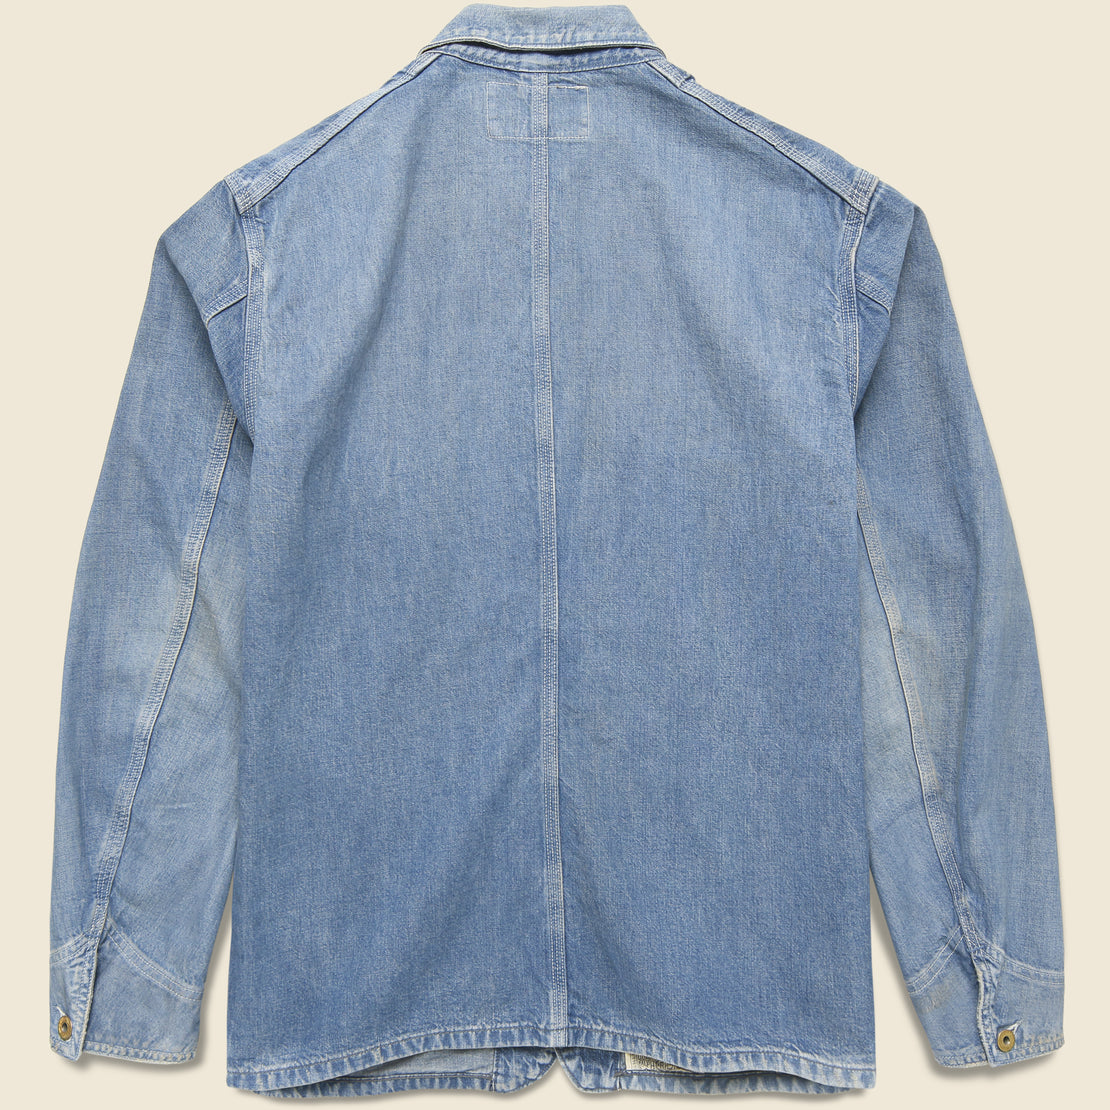 Irvin Denim Engineer Jacket - Atmore Wash - RRL - STAG Provisions - Outerwear - Coat / Jacket